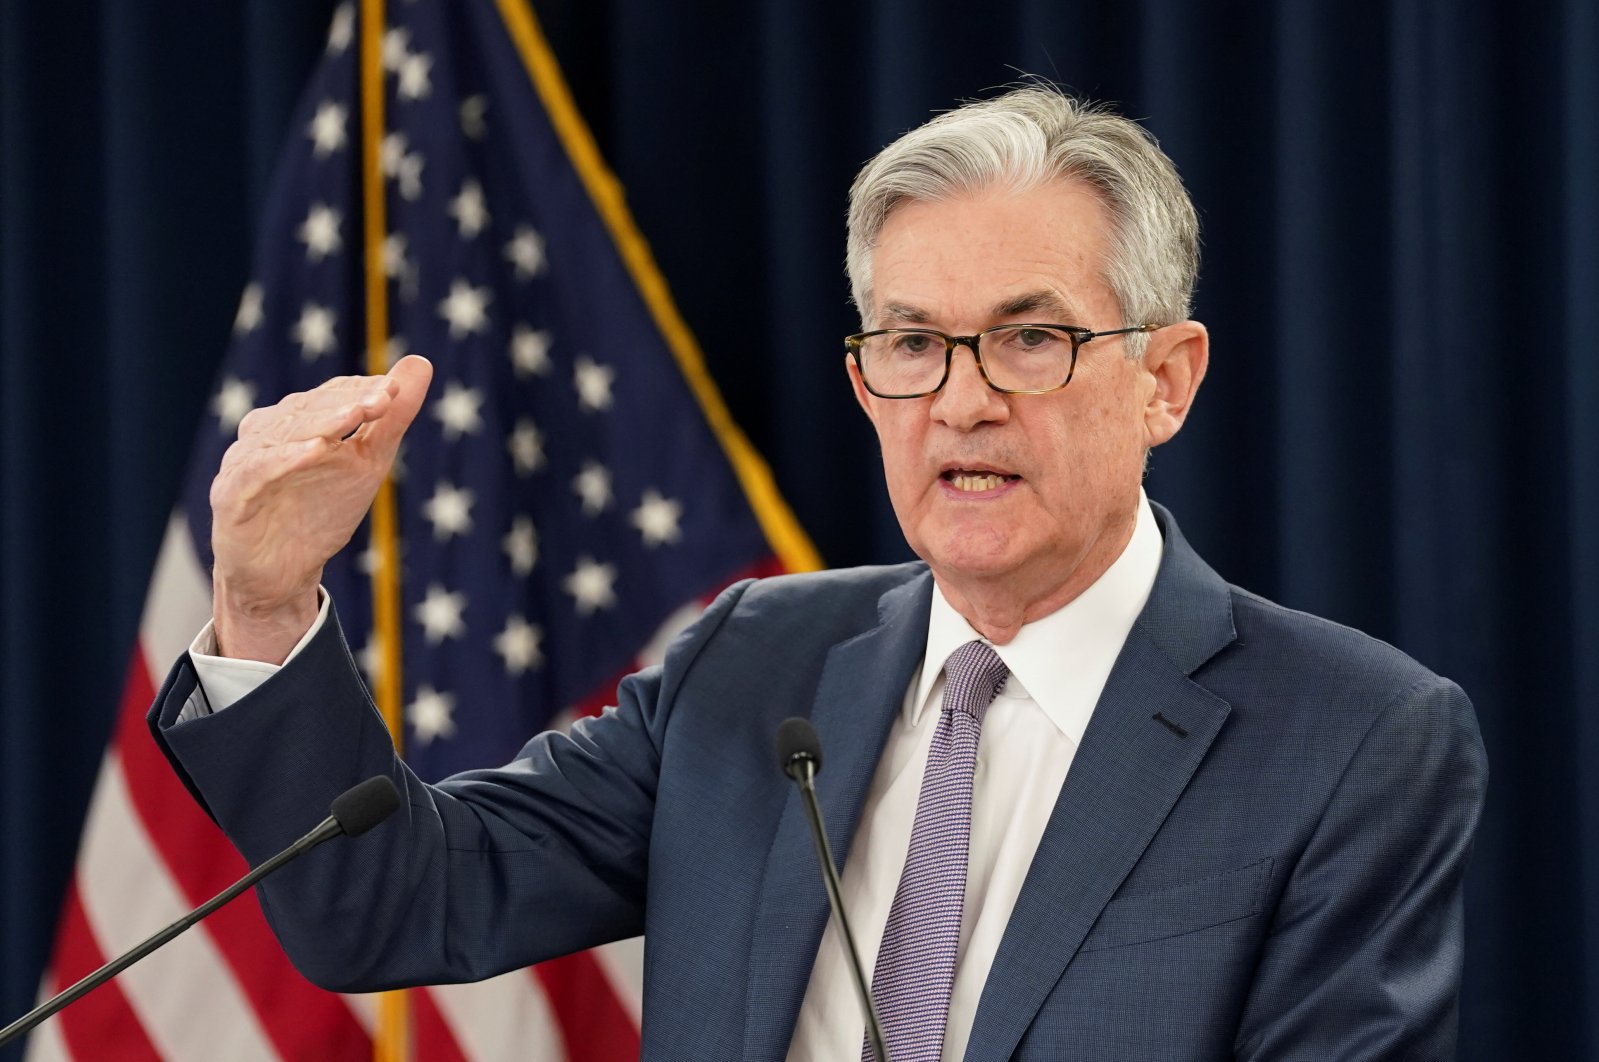 U.S. Federal Reserve Chairman Jerome Powell speaks to reporters during a news conference in Washington, D.C., U.S., March 3, 2020. (Reuters Photo)